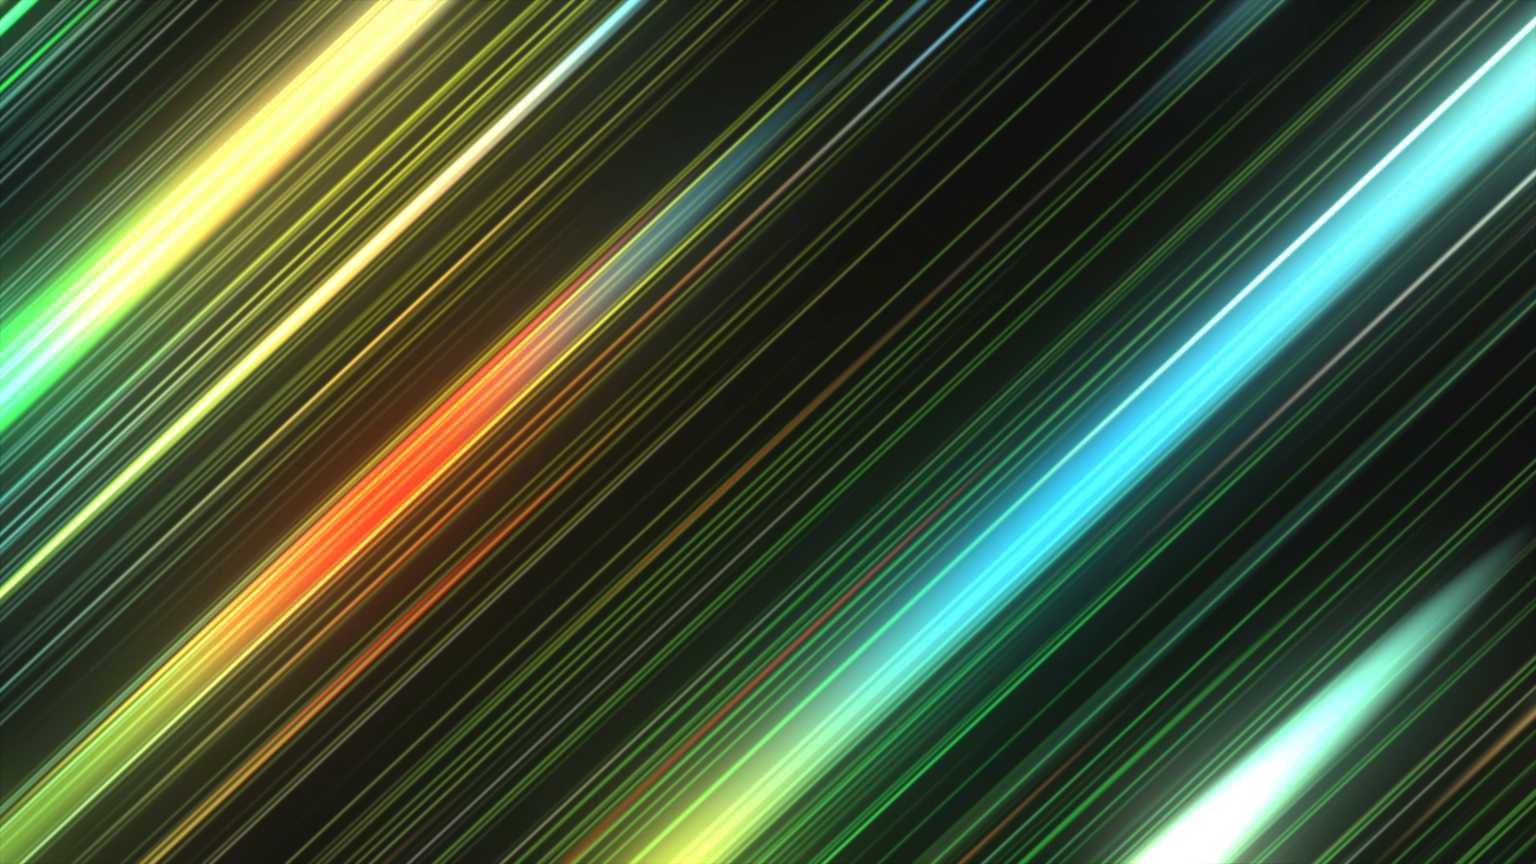 4K Colorful Lines Motion Background || VFX Free To Use 4K Screensaver || FREE DOWNLOAD